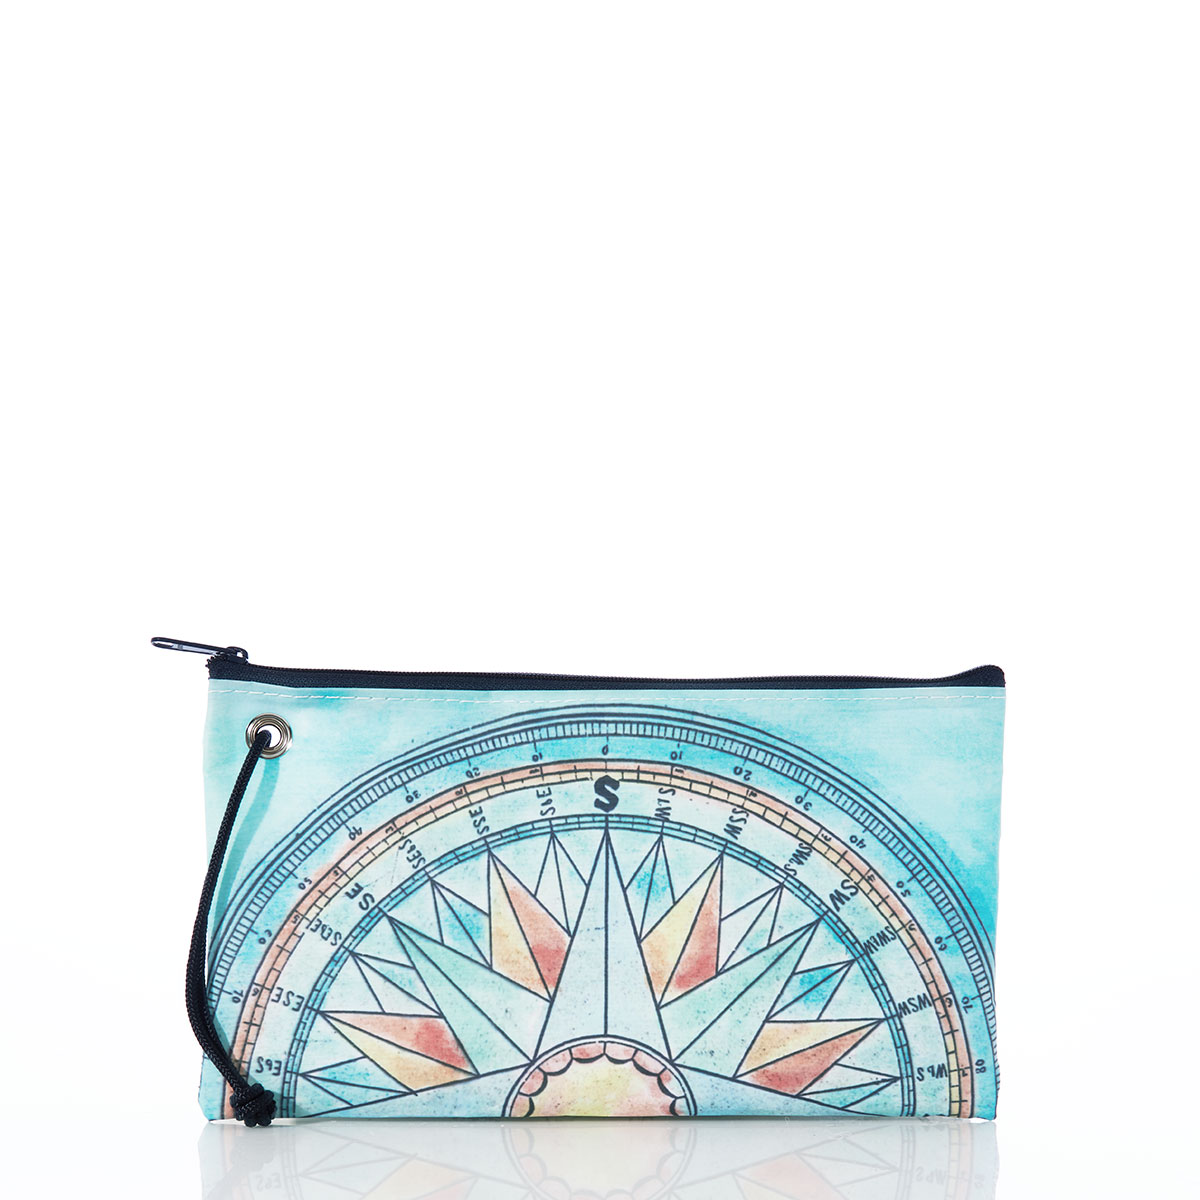 back view of compass rose in bright spring colors printed on a recycled sail cloth large wristlet with navy zipper and wristlet strap